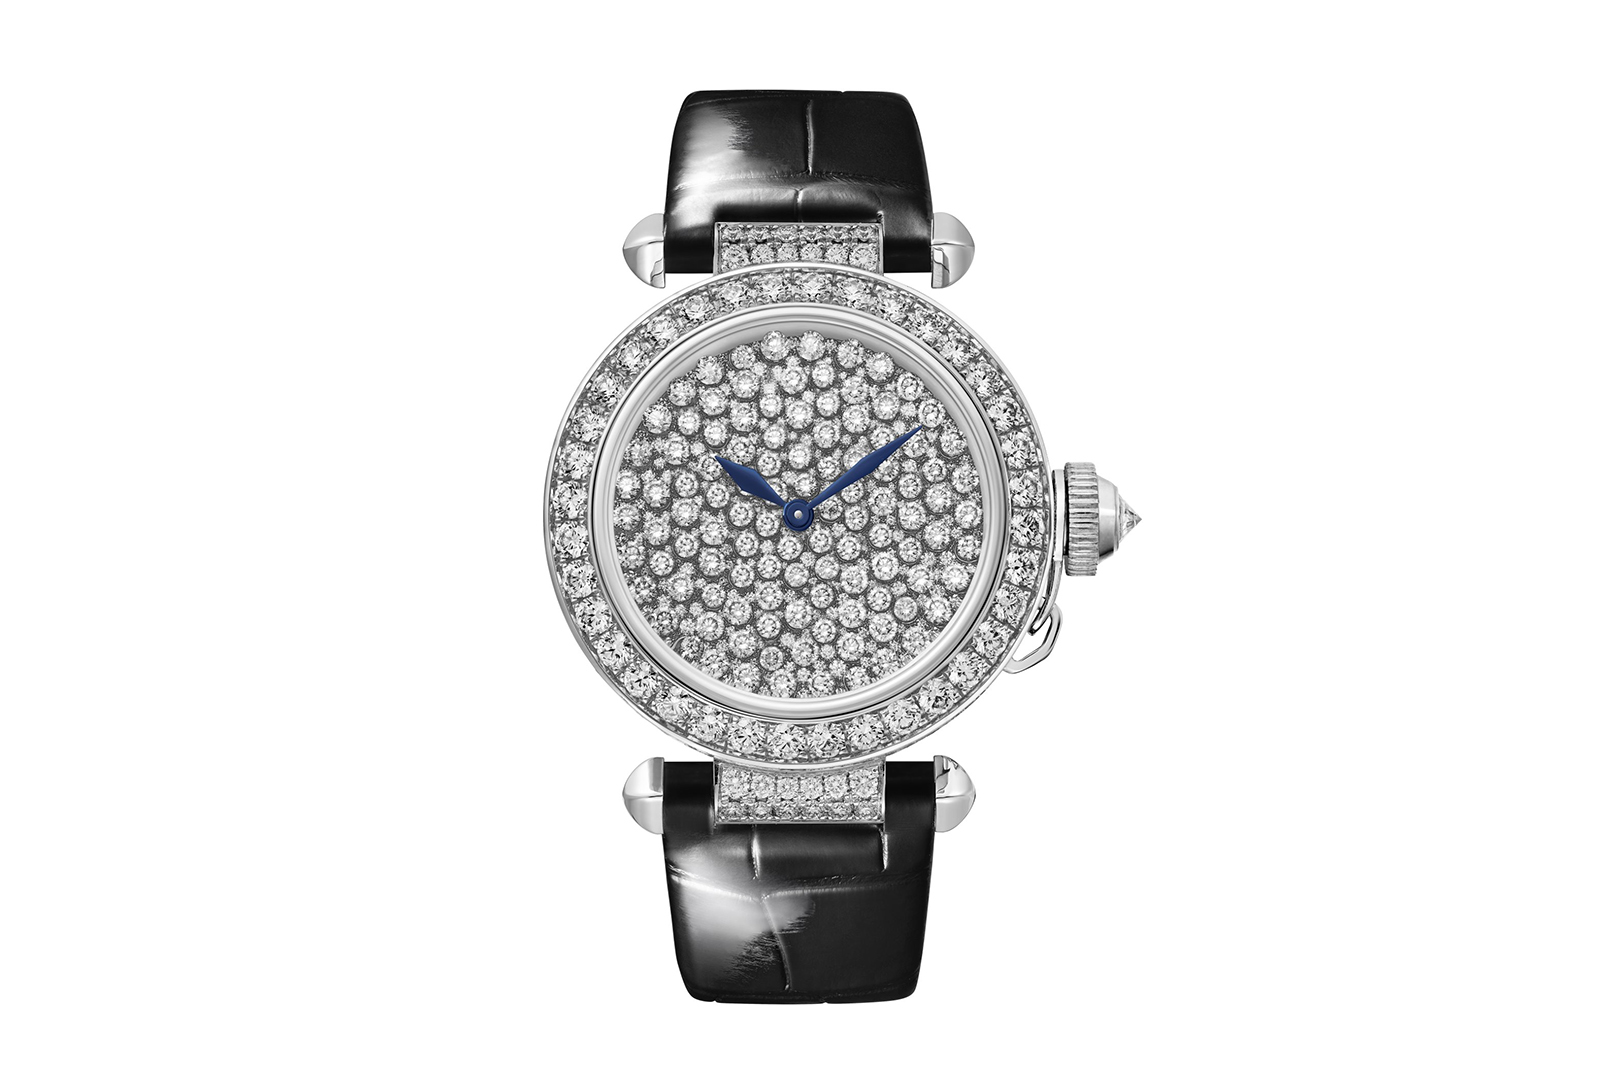 New pavé diamond watches with sparkling personalities